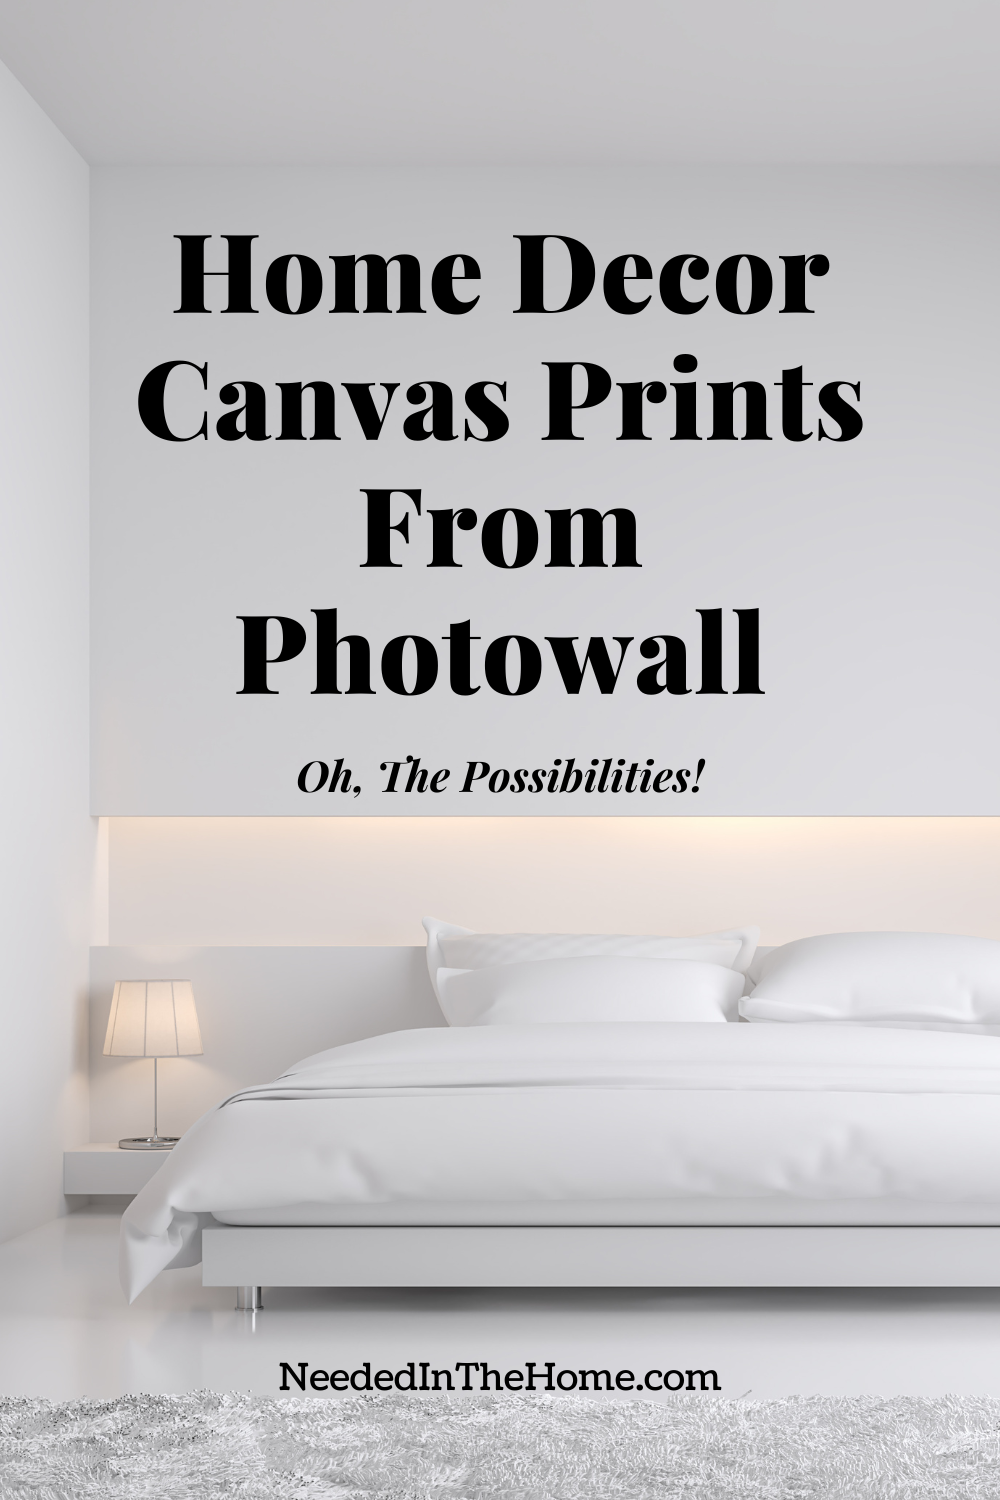 pinterest-pin-description home decor canvas prints from photowall - oh, the possibilities large bed white walls and ceiling lamp neededinthehome